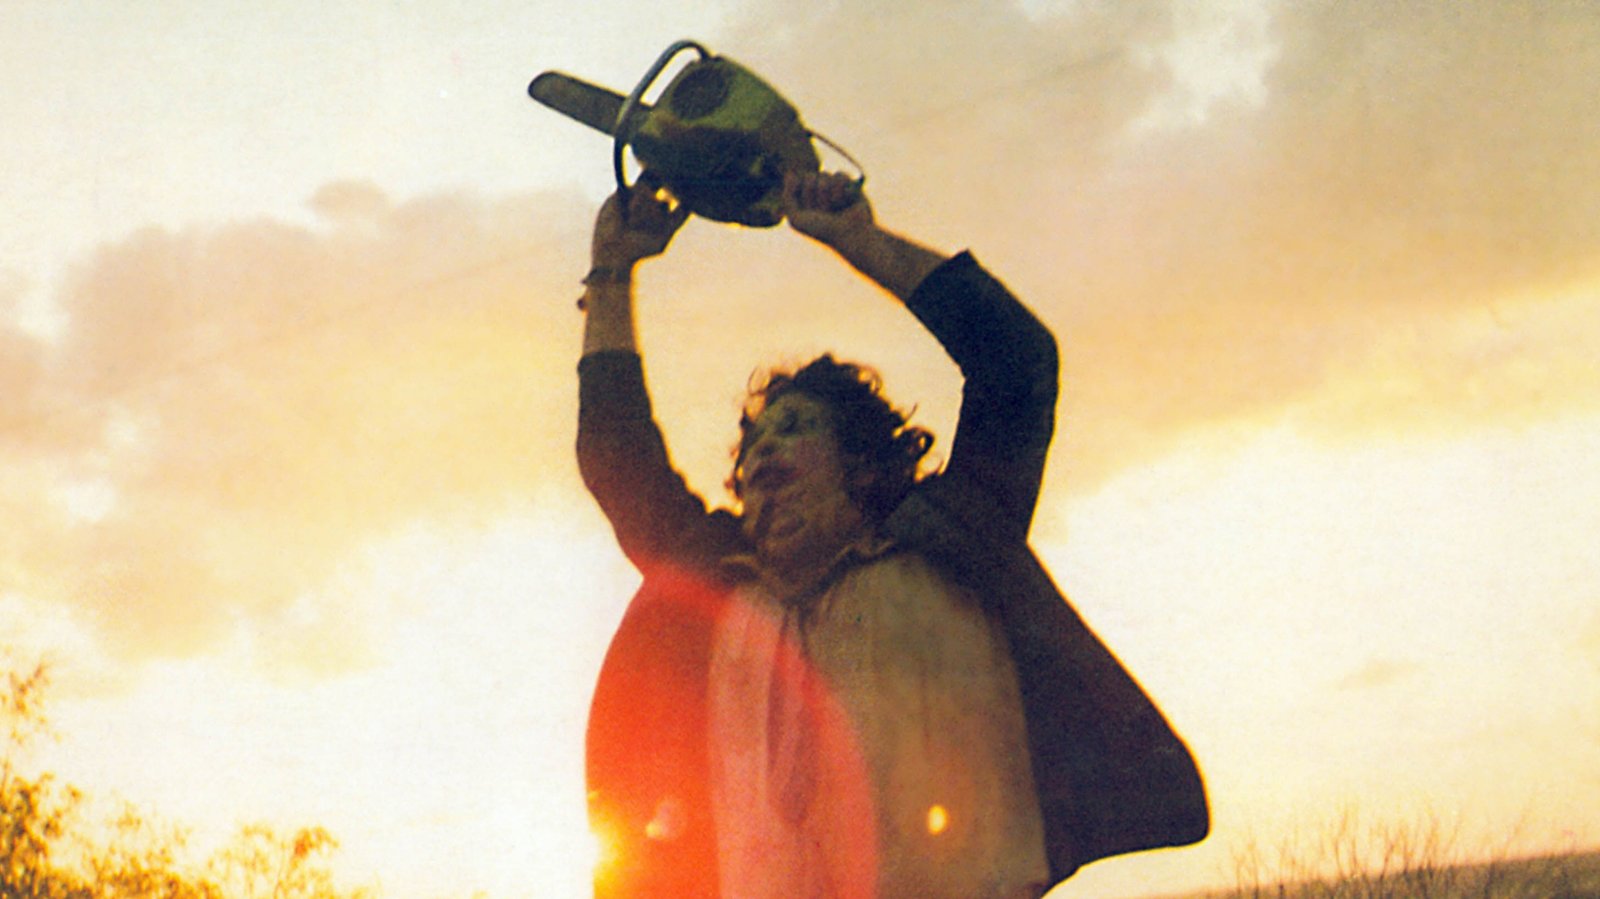 Leatherface in The Texas Chainsaw Massacre (1974)